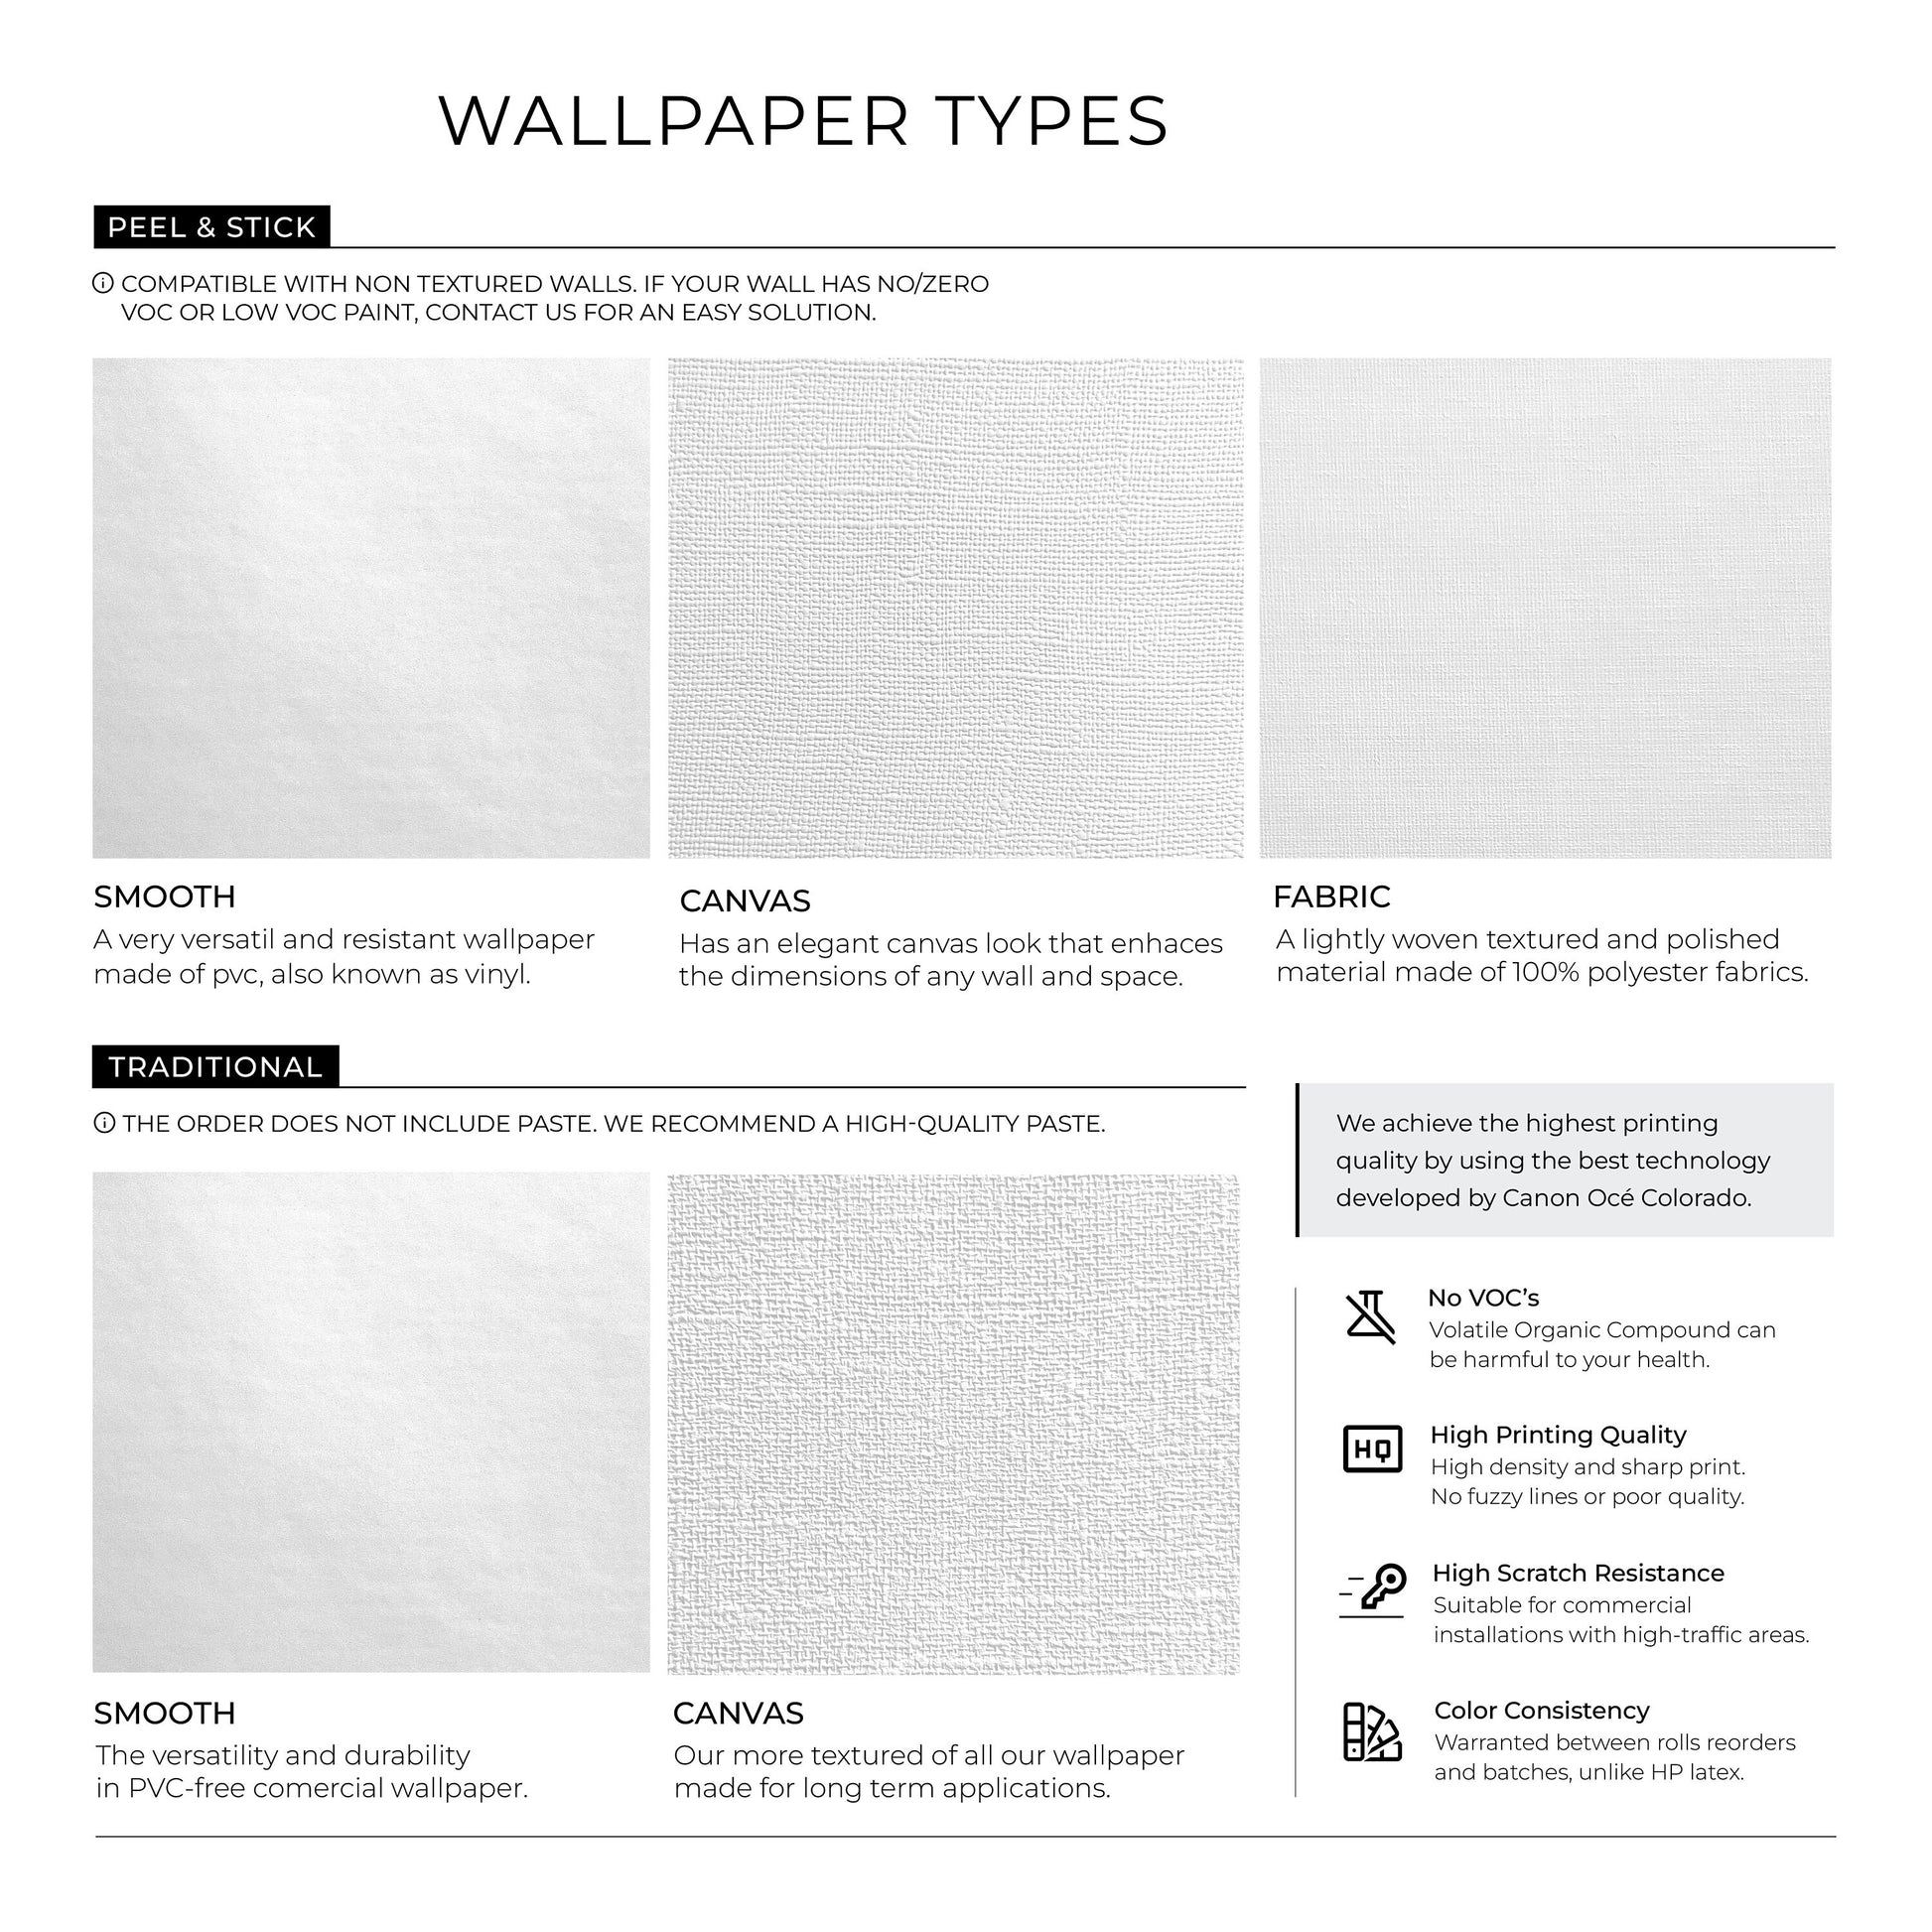 Removable Wallpaper Temporary Wallpaper Vintage Wallpaper Peel and Stick Wallpaper Wall Paper Boho - A621